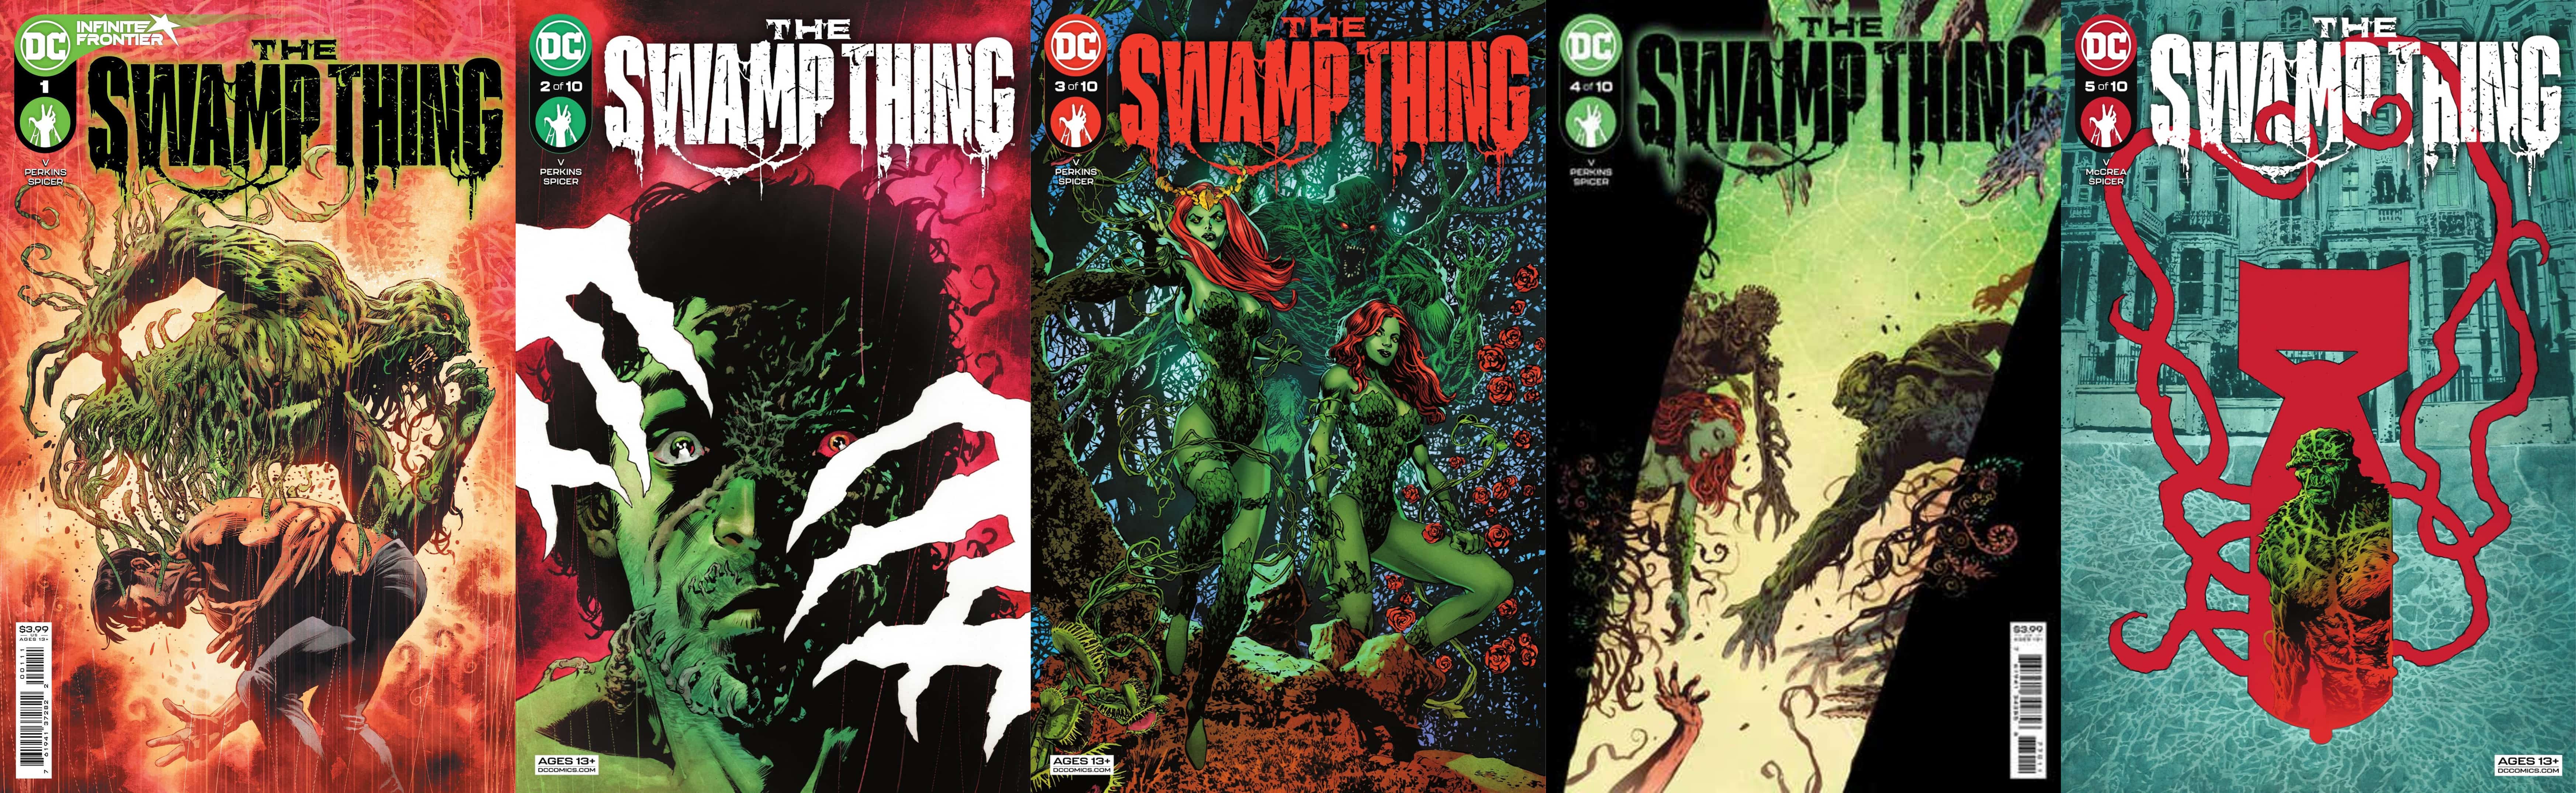 The Swamp Thing #1-5: An Agent of the Green (ARC REVIEW) - Comic Watch